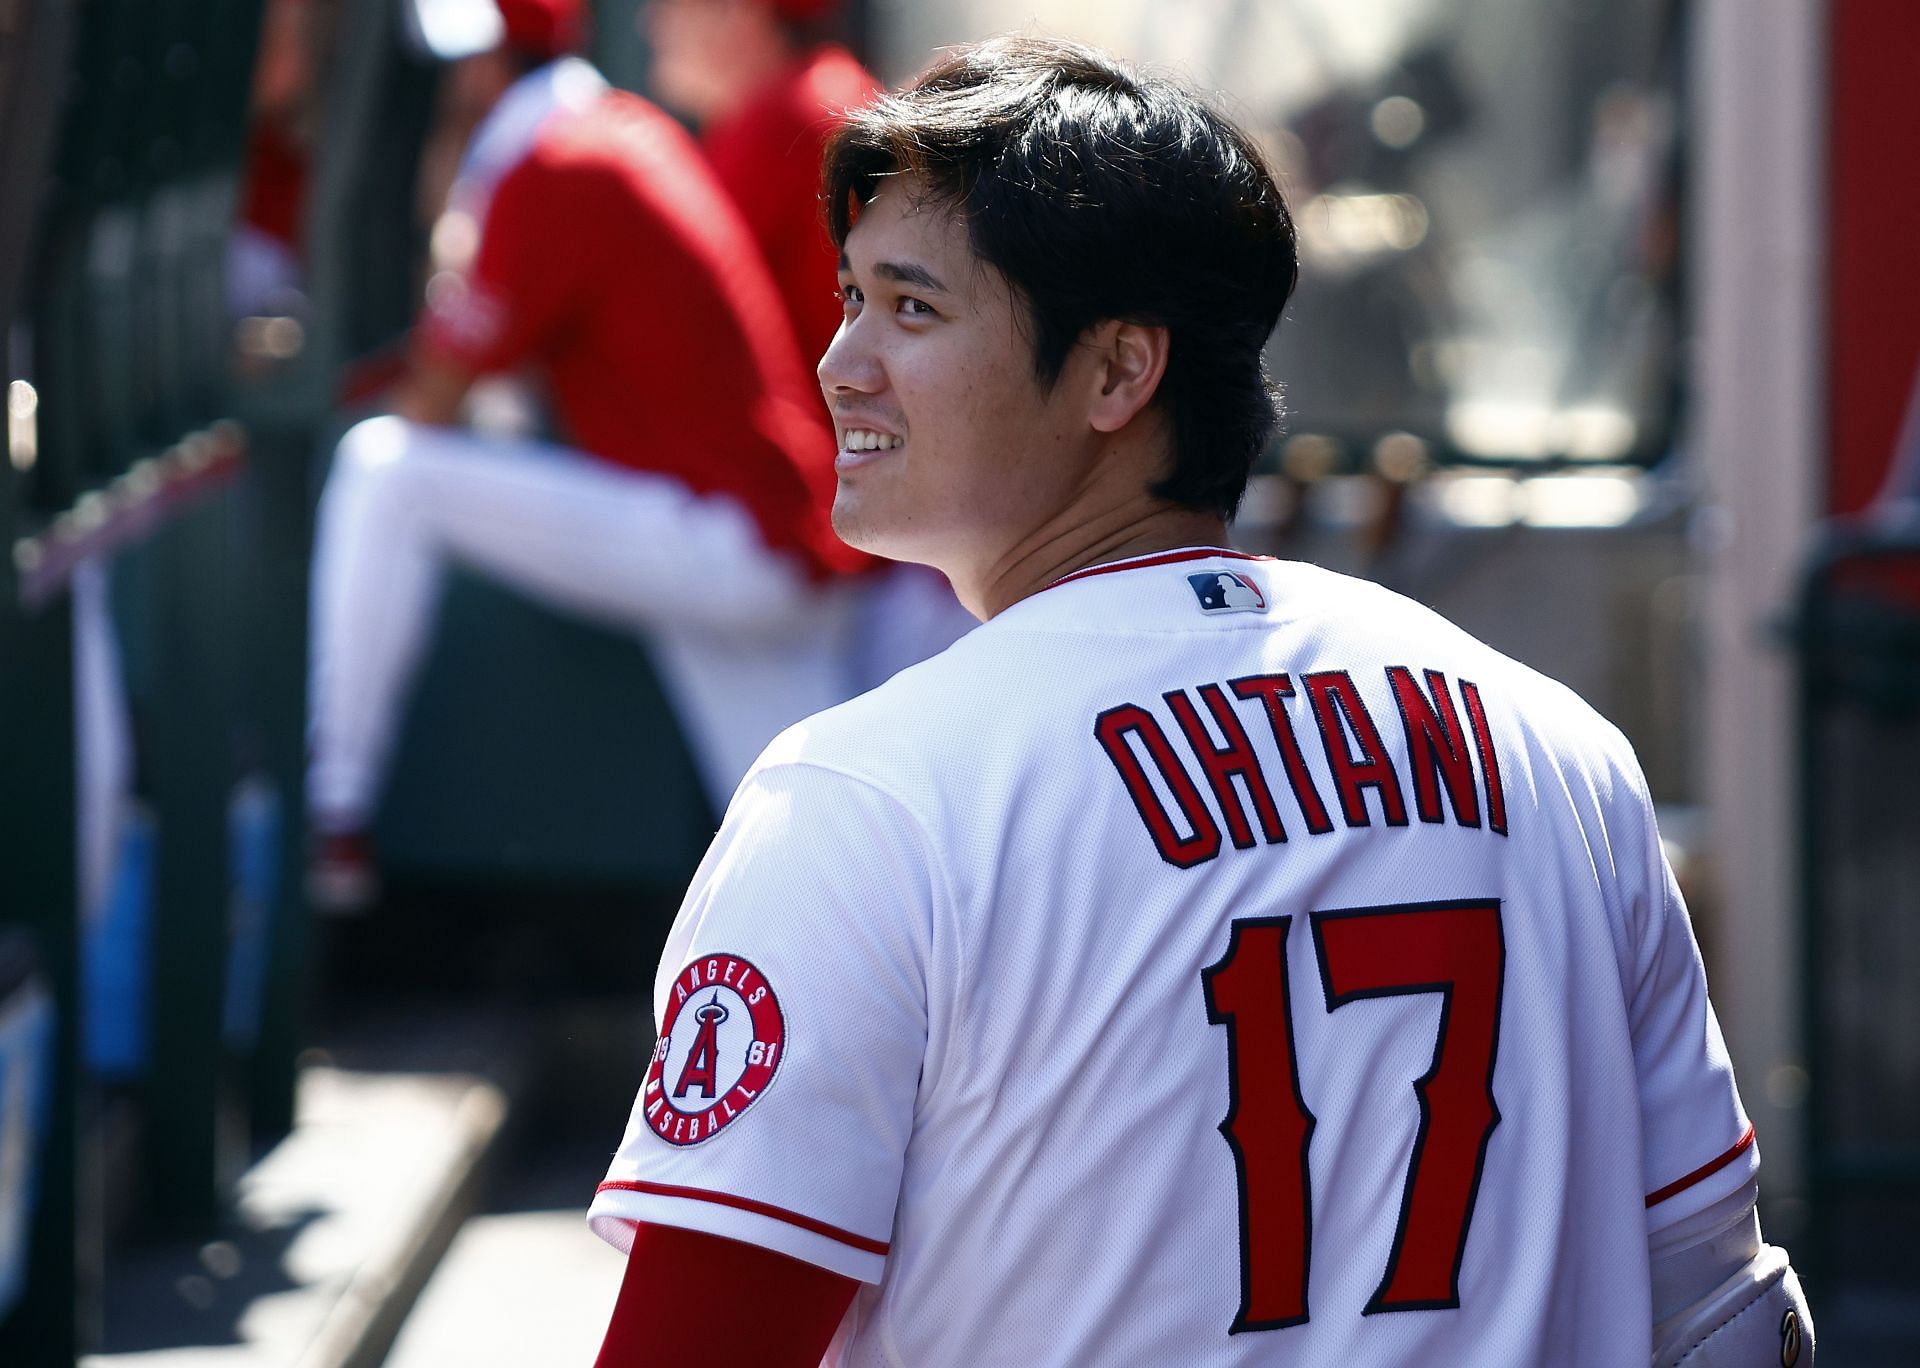 NYSportsJournalism.com - Shohei Ohtani Signs Exclusive Deal With